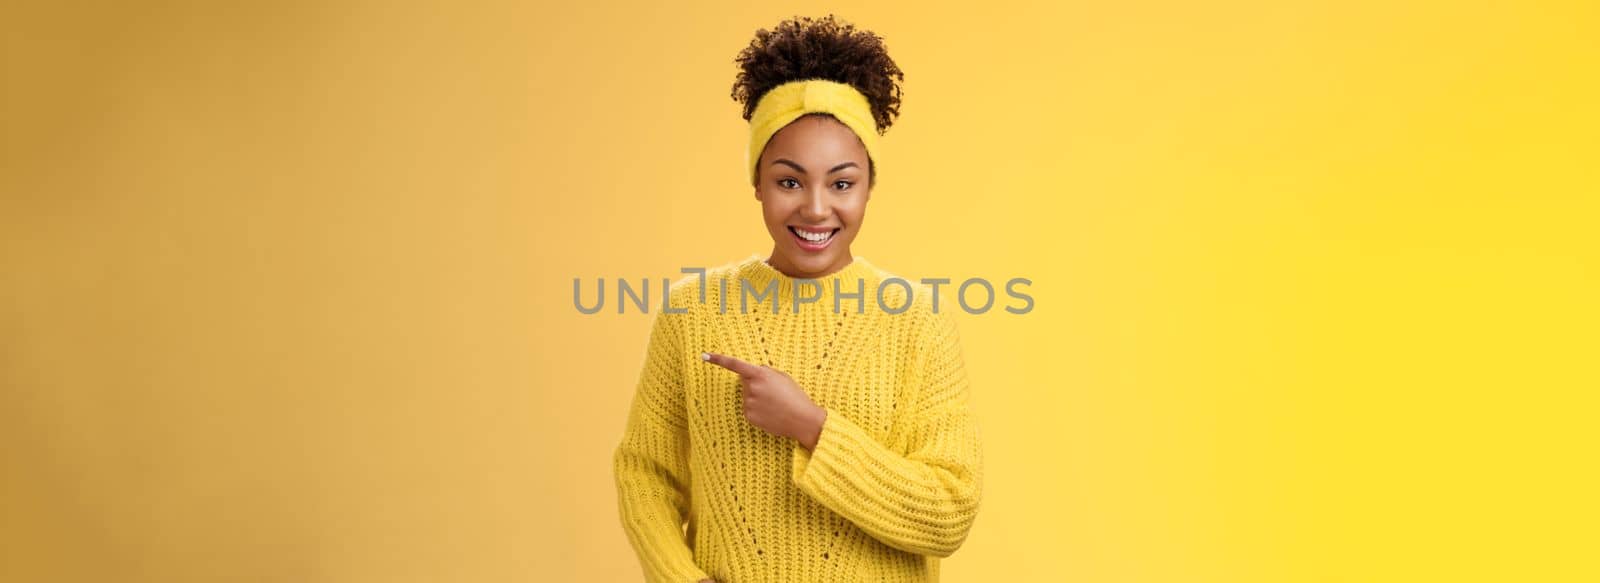 Friendly ougoing relaxed african-american woman casually pointing right during conversation discussing recent new cafe open awesome discounts promos standing happily yellow background. Copy space